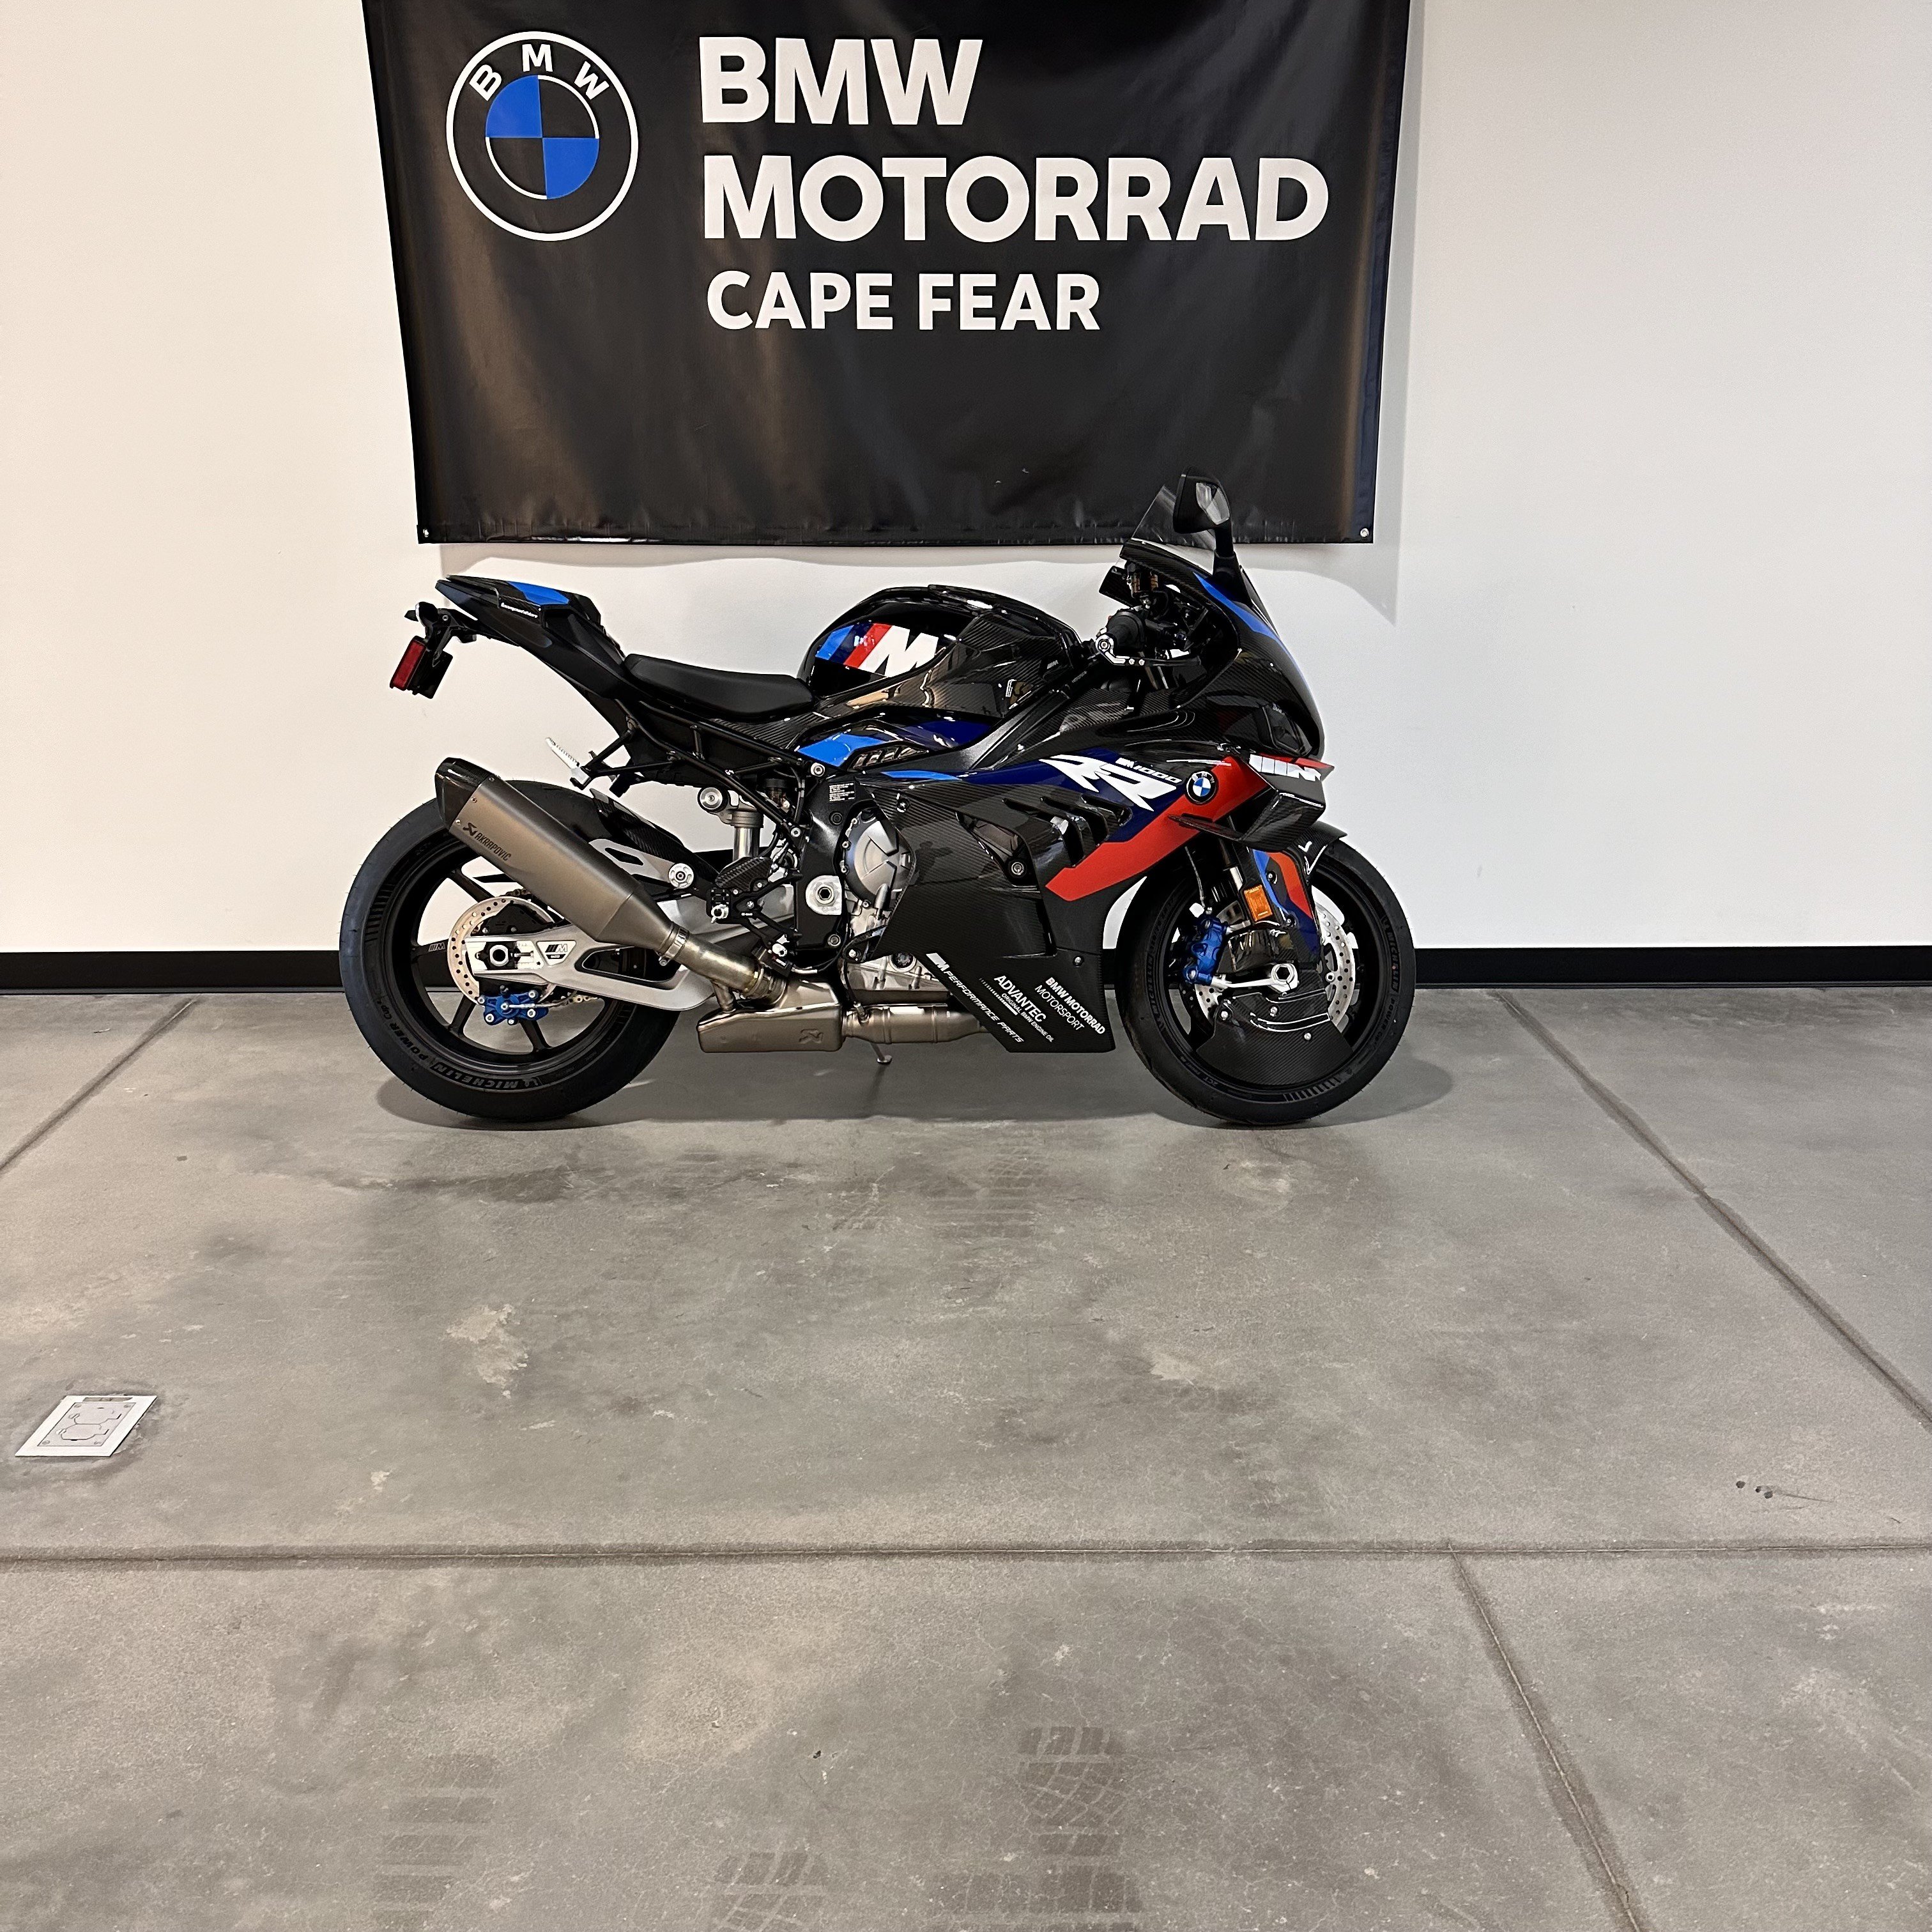 New 2023 BMW M 1000 RR BMW Motorcycles Cape Fear | Wilmington NC 28403